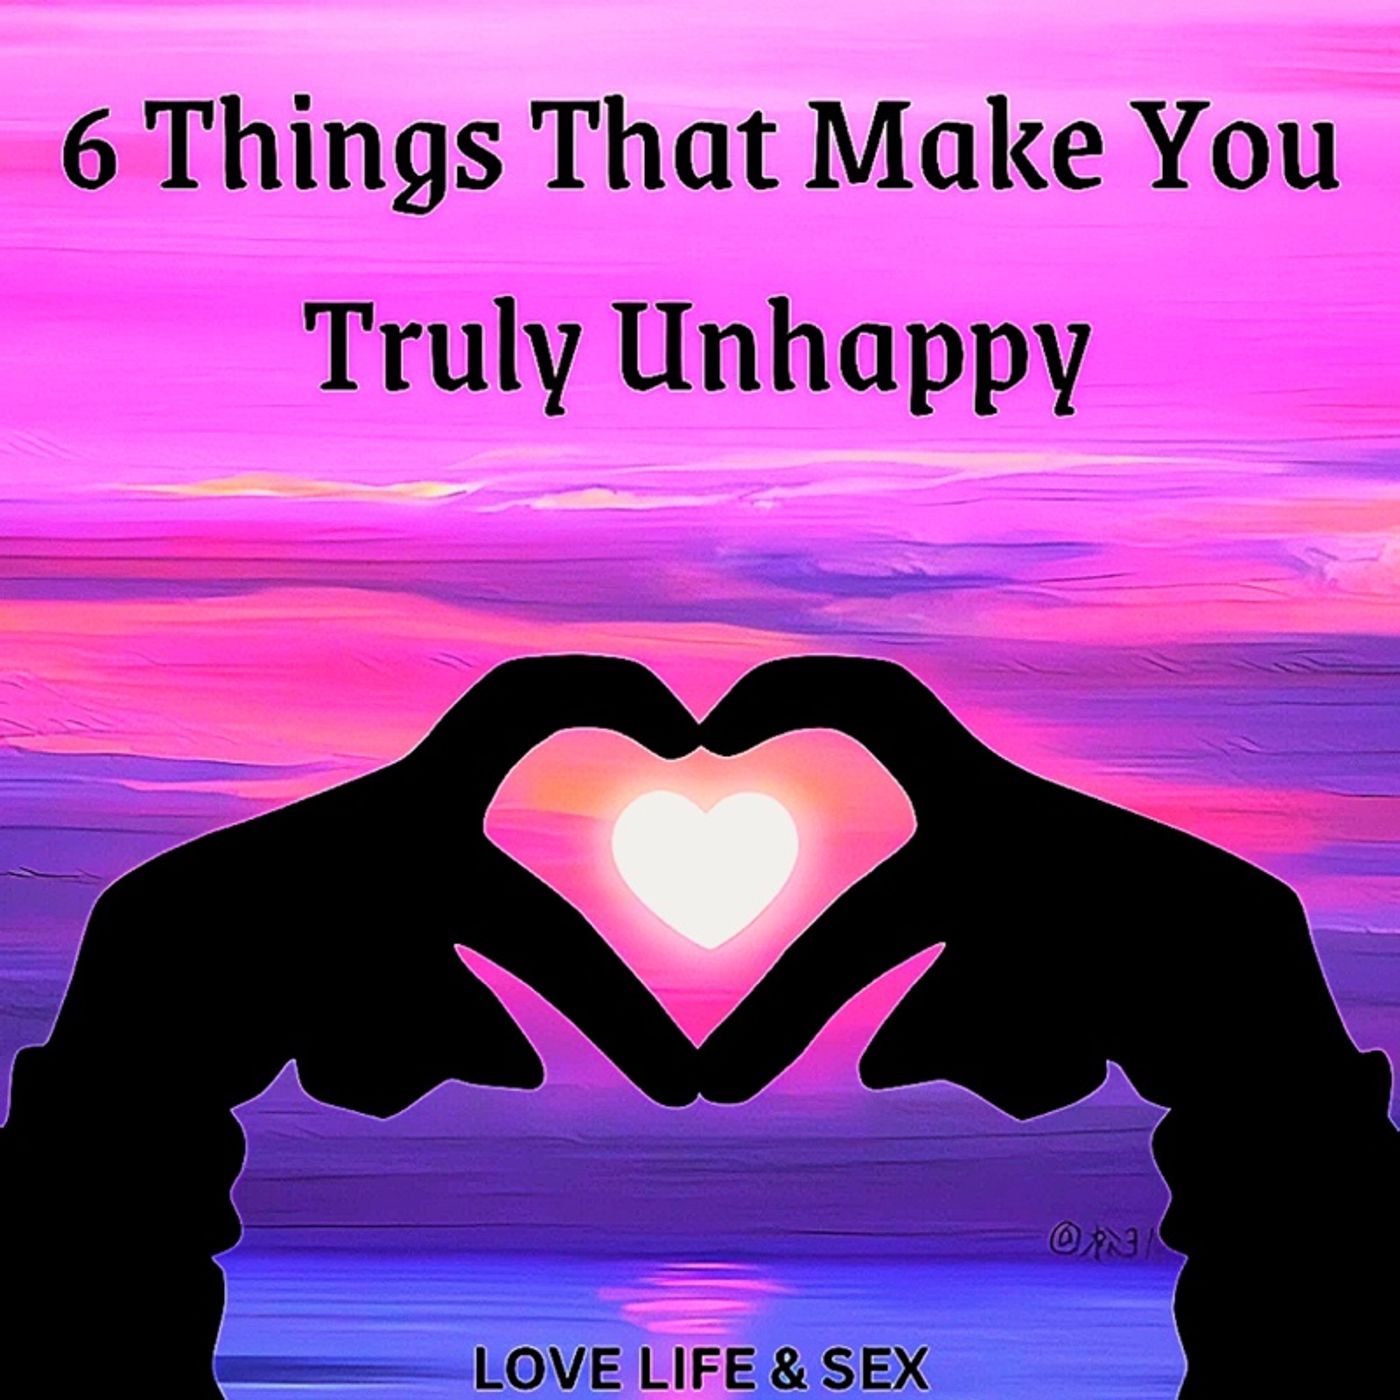 6 Things That Make You Truly Unhappy 😞